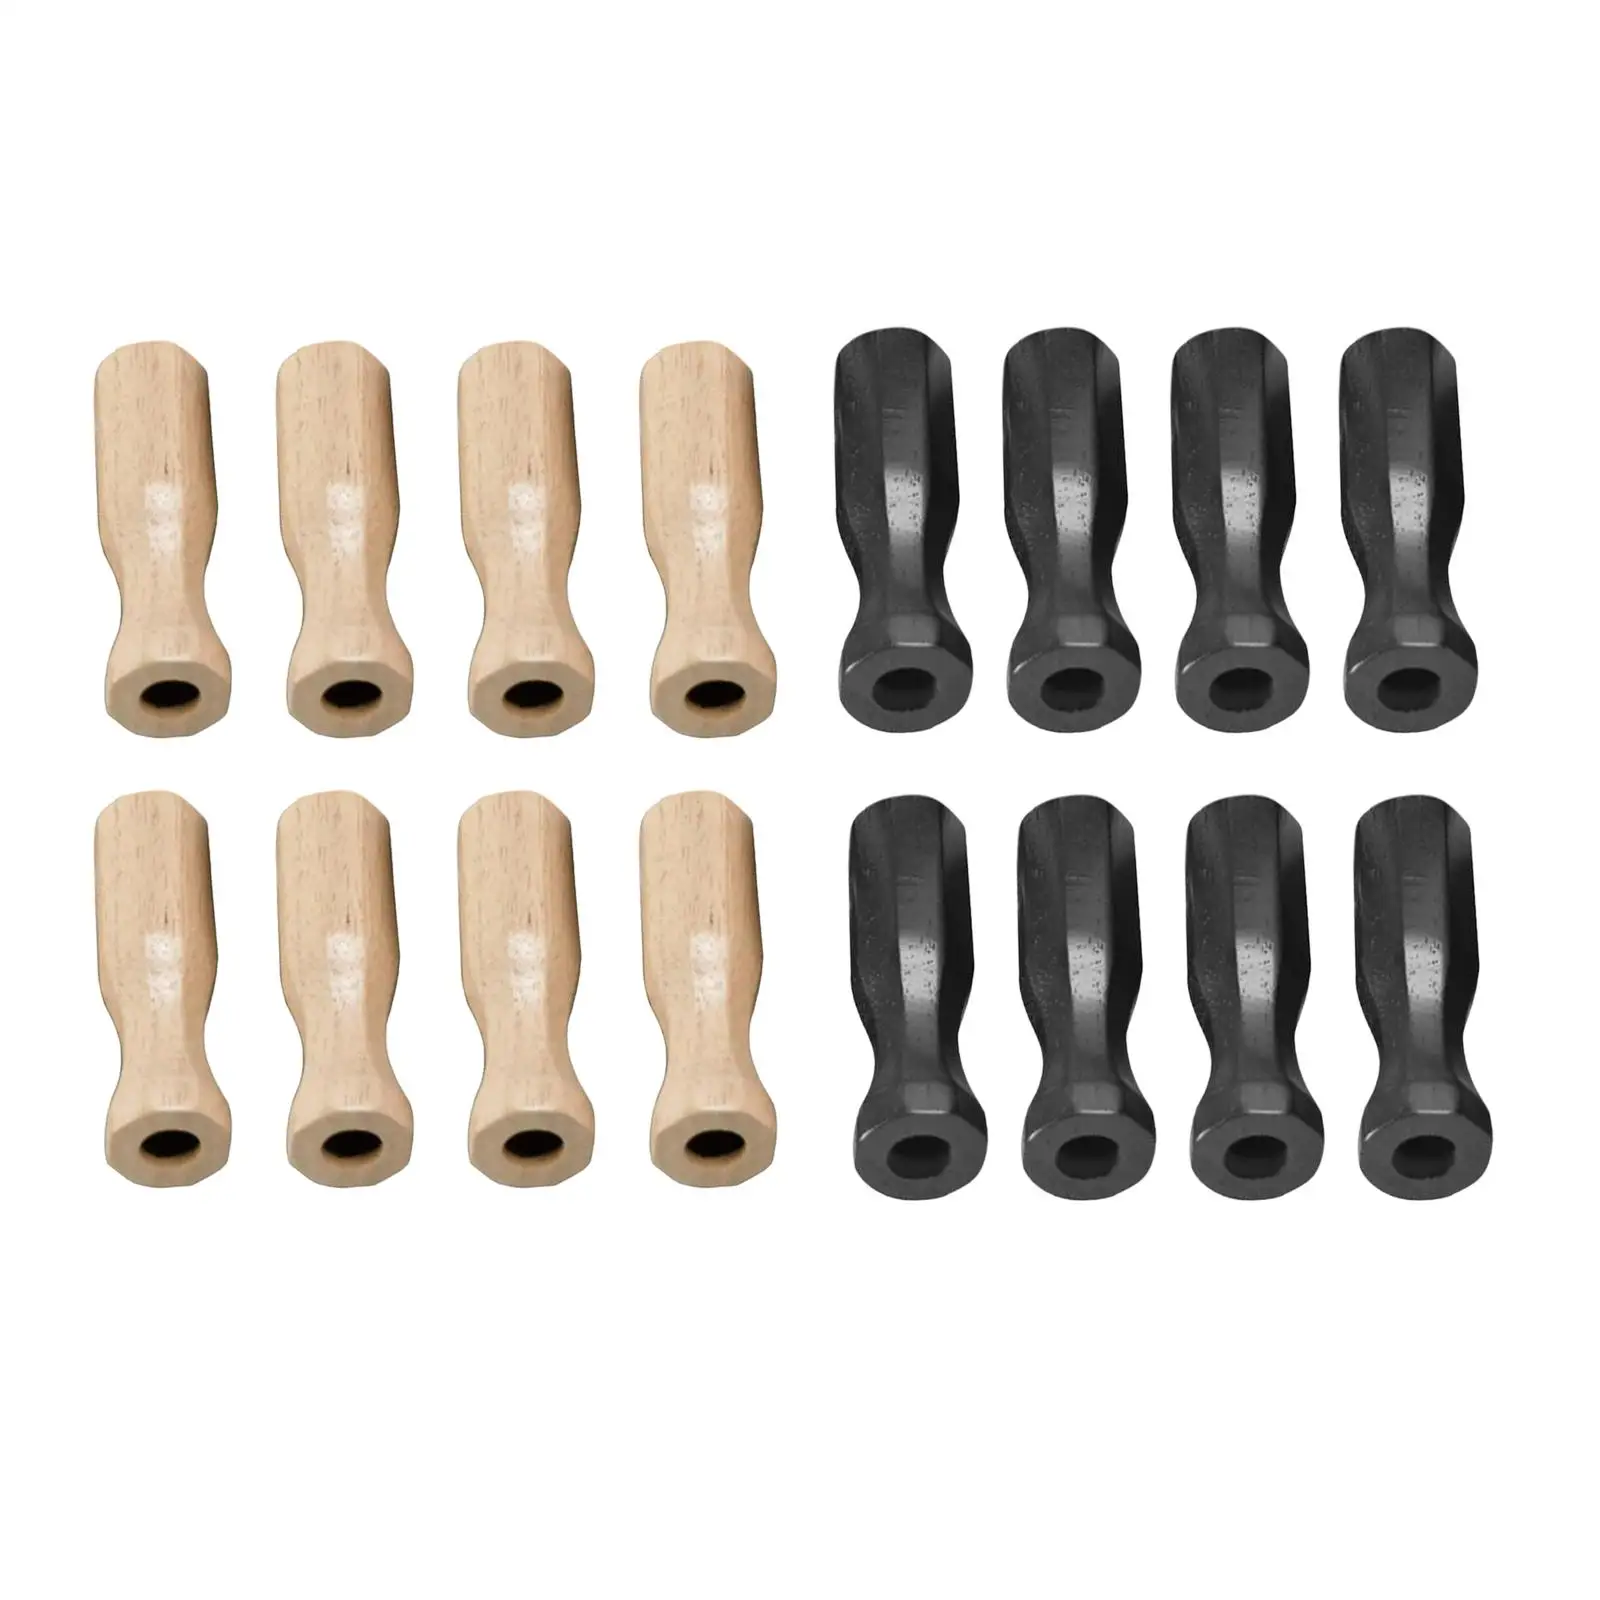 8pcs Soccer Table Handles Non-slip Foosball Grip, Portable Replacements for